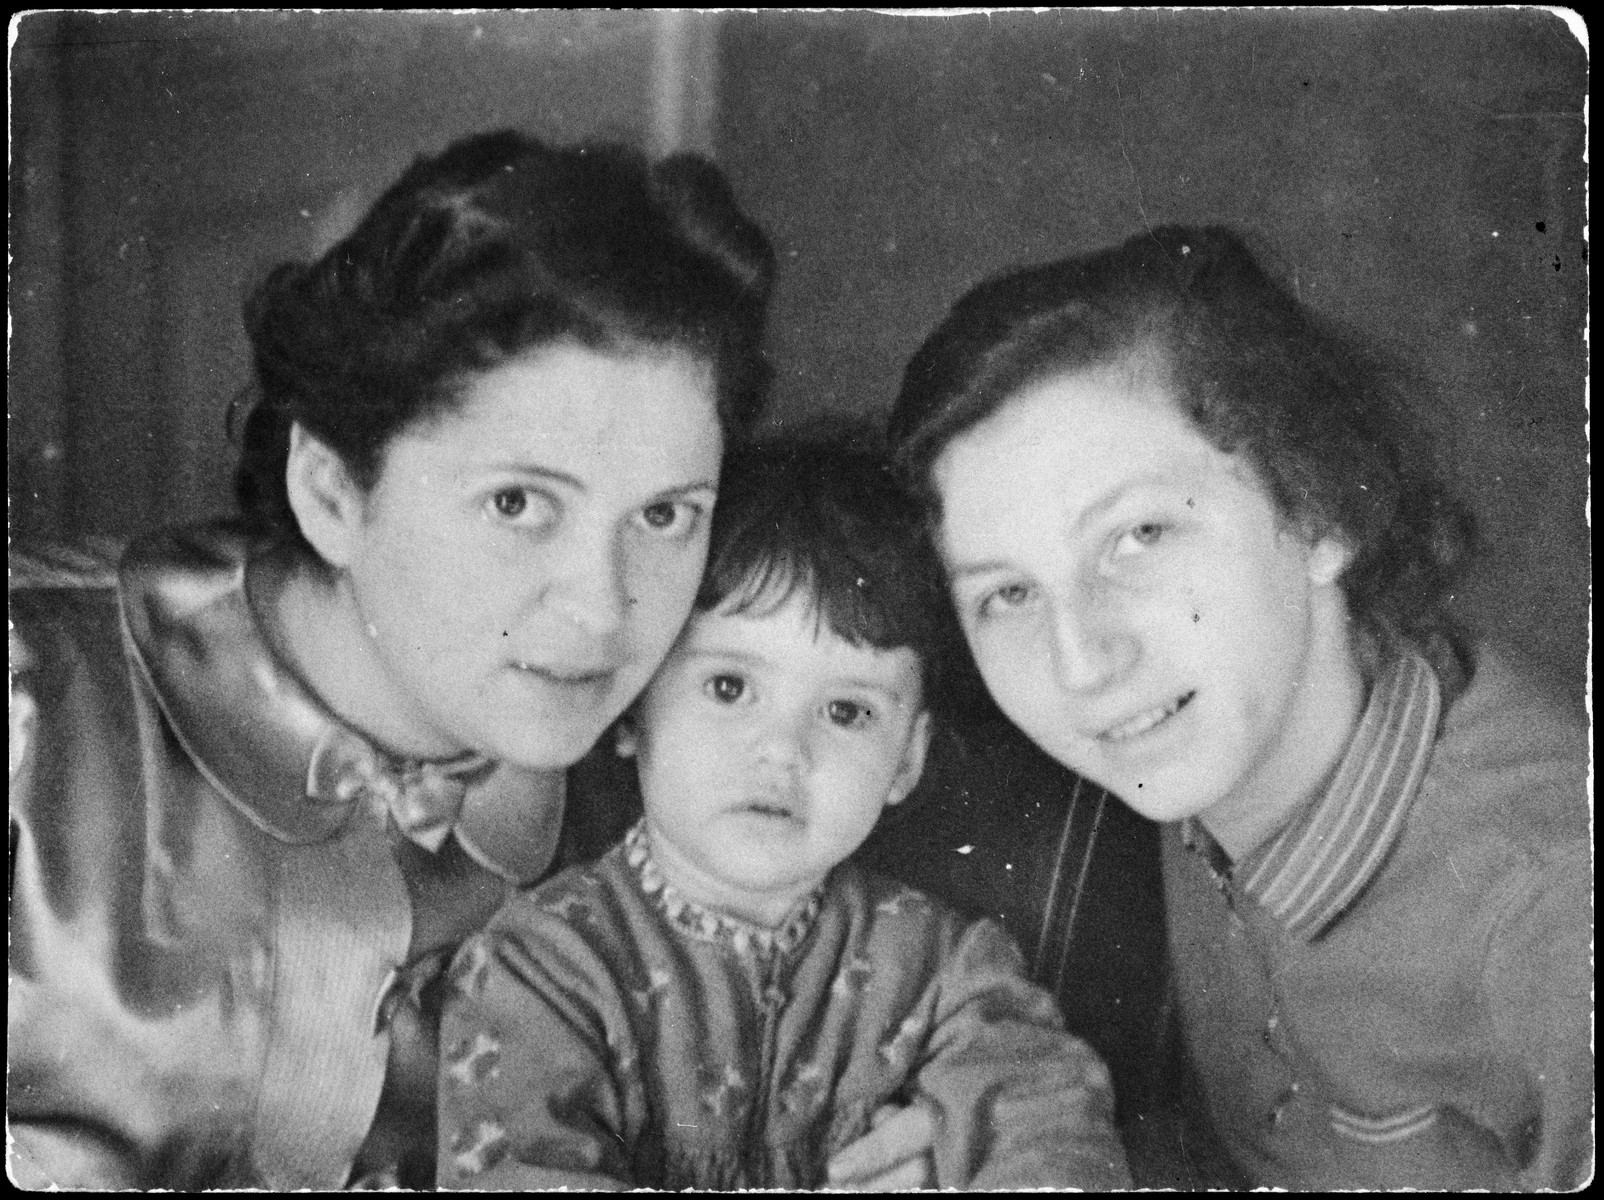 Close-up portrait of two German Jewish women and a young baby girl.

Pictured from left to right are Gertrude Rubenstein, her daughter Ruth Marion and the nanny, also Ruth who perished during the Holocaust